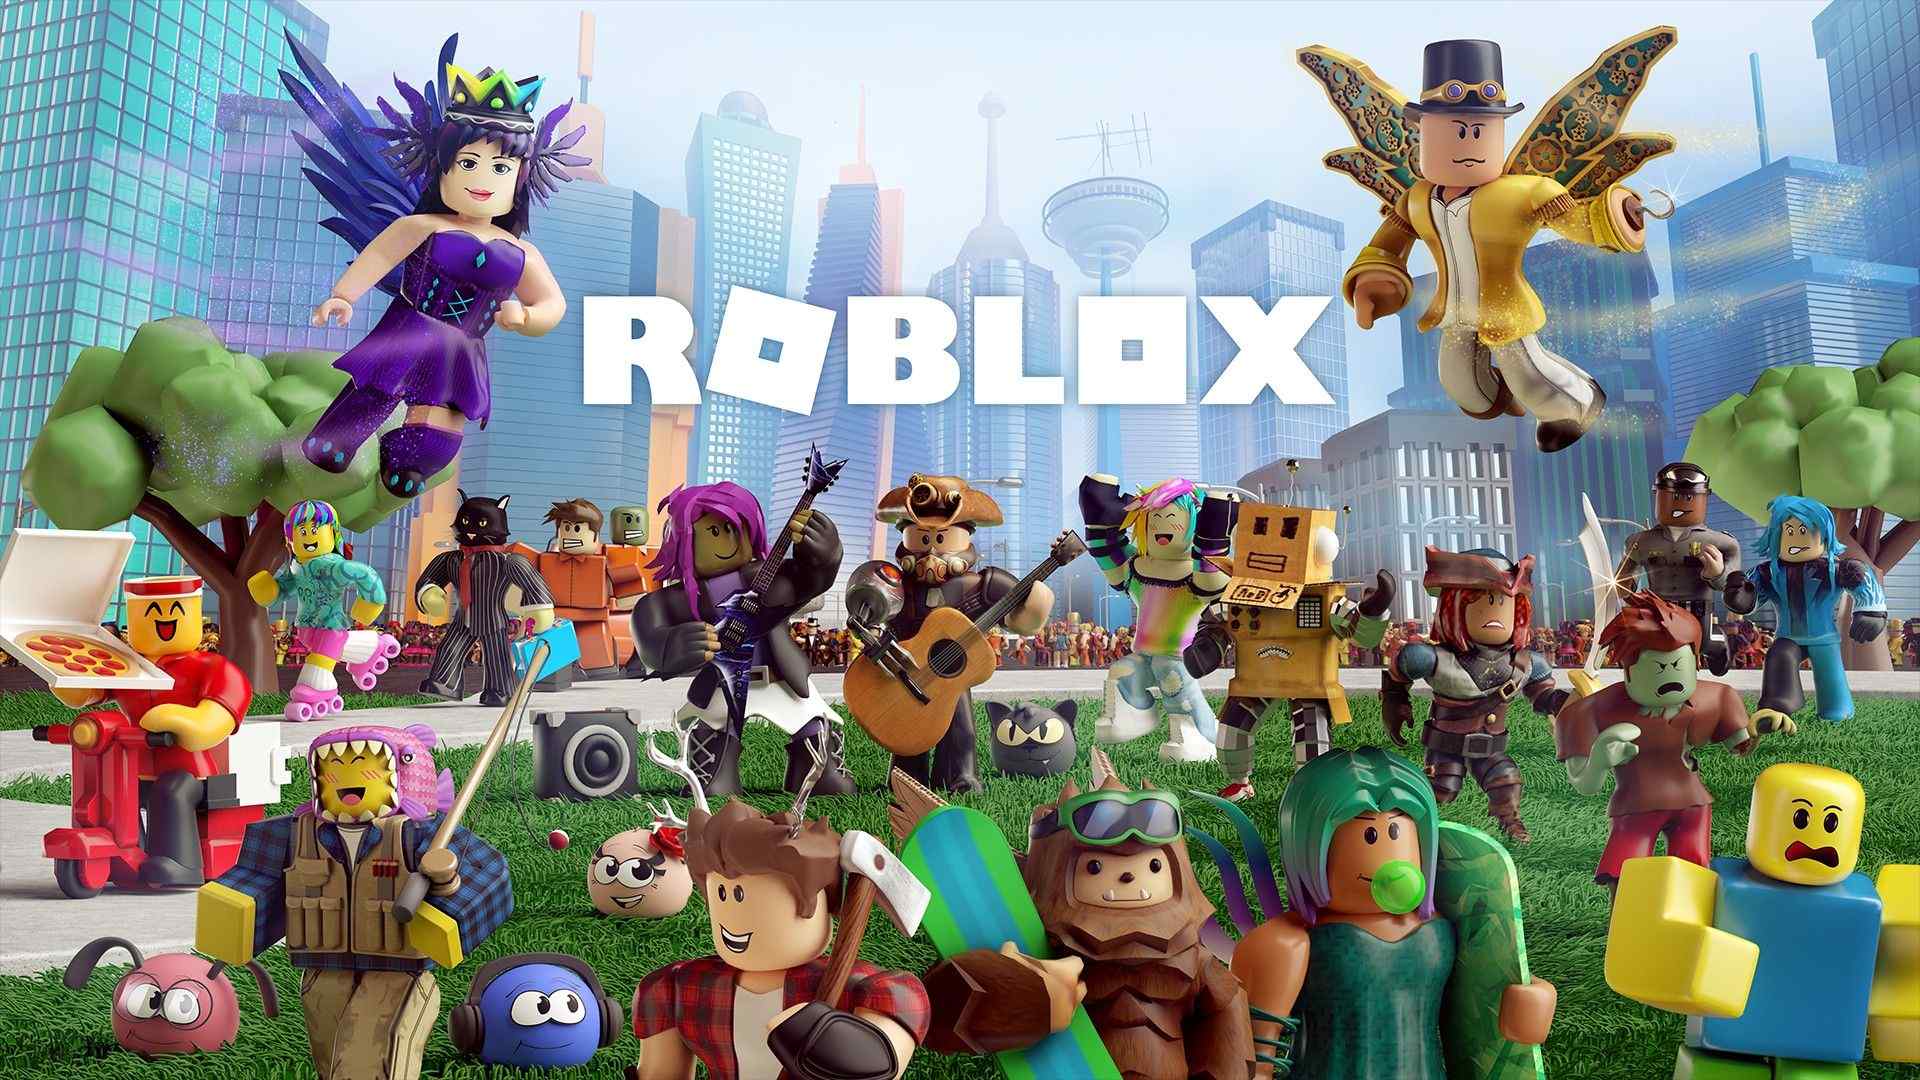 Download Roblox Wallpapers for FREE [100,000+ Mobile & Desktop